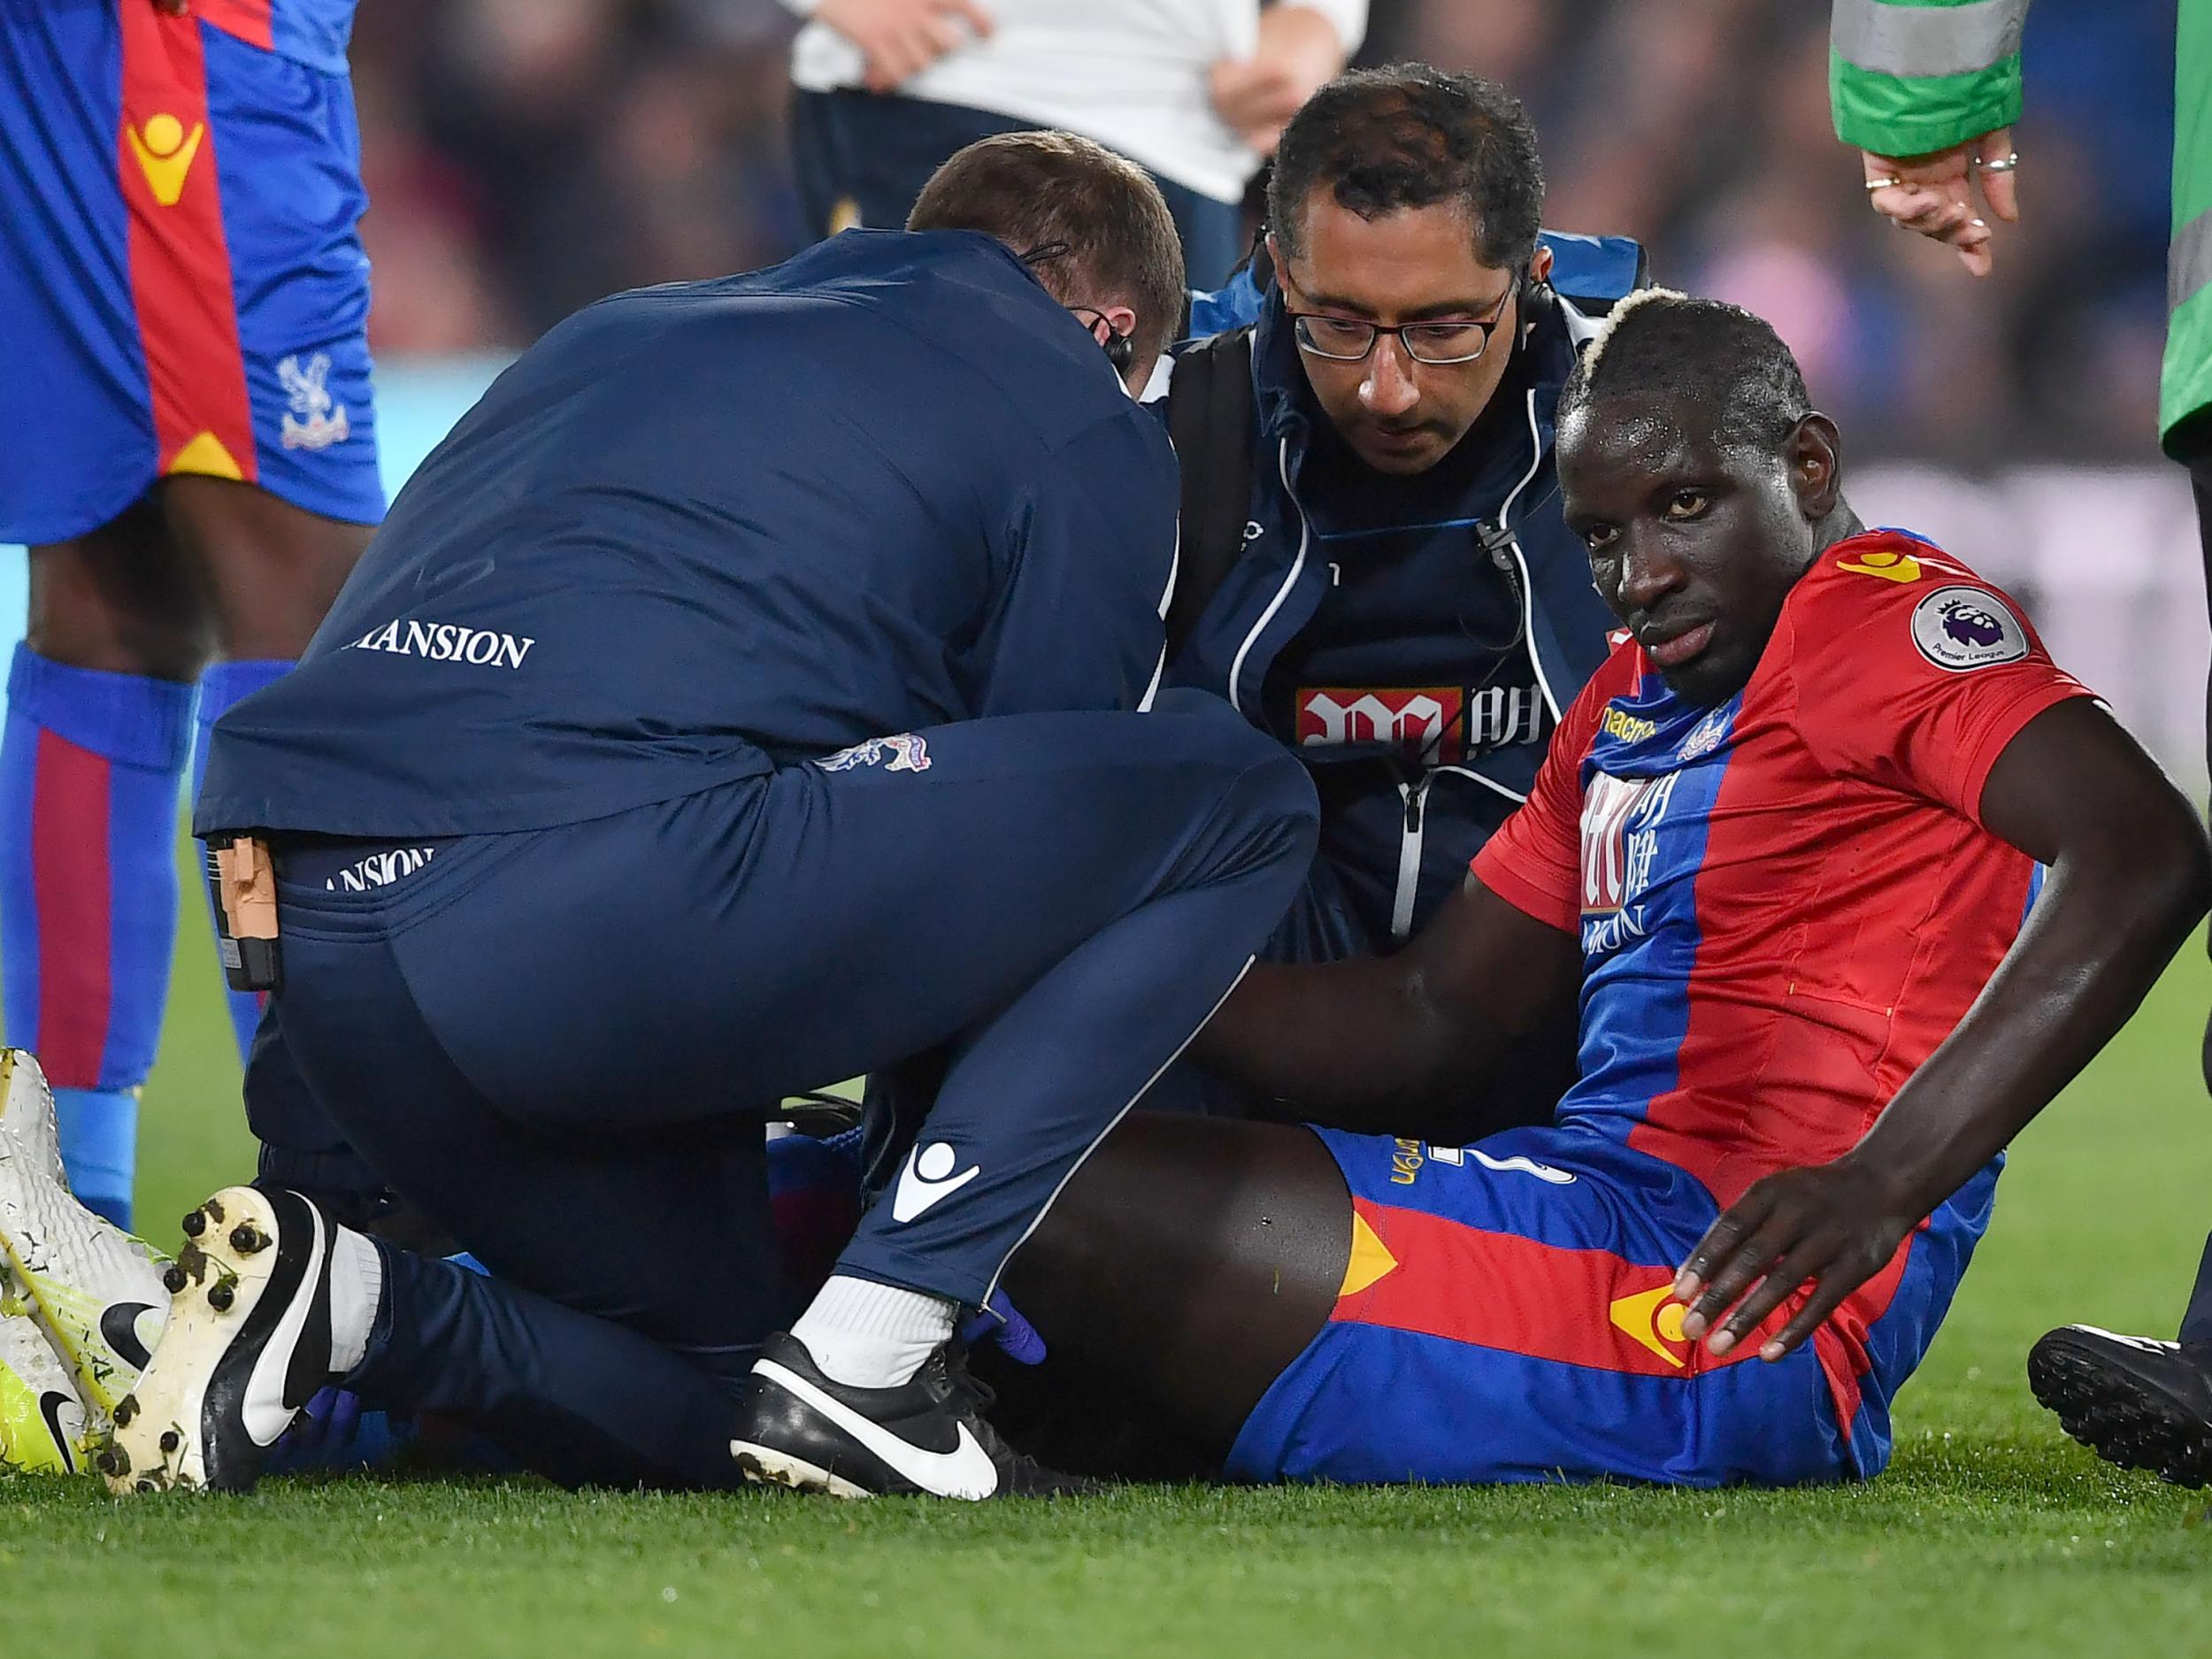 Sakho suffered a nasty-looking injury but he could well play again this season